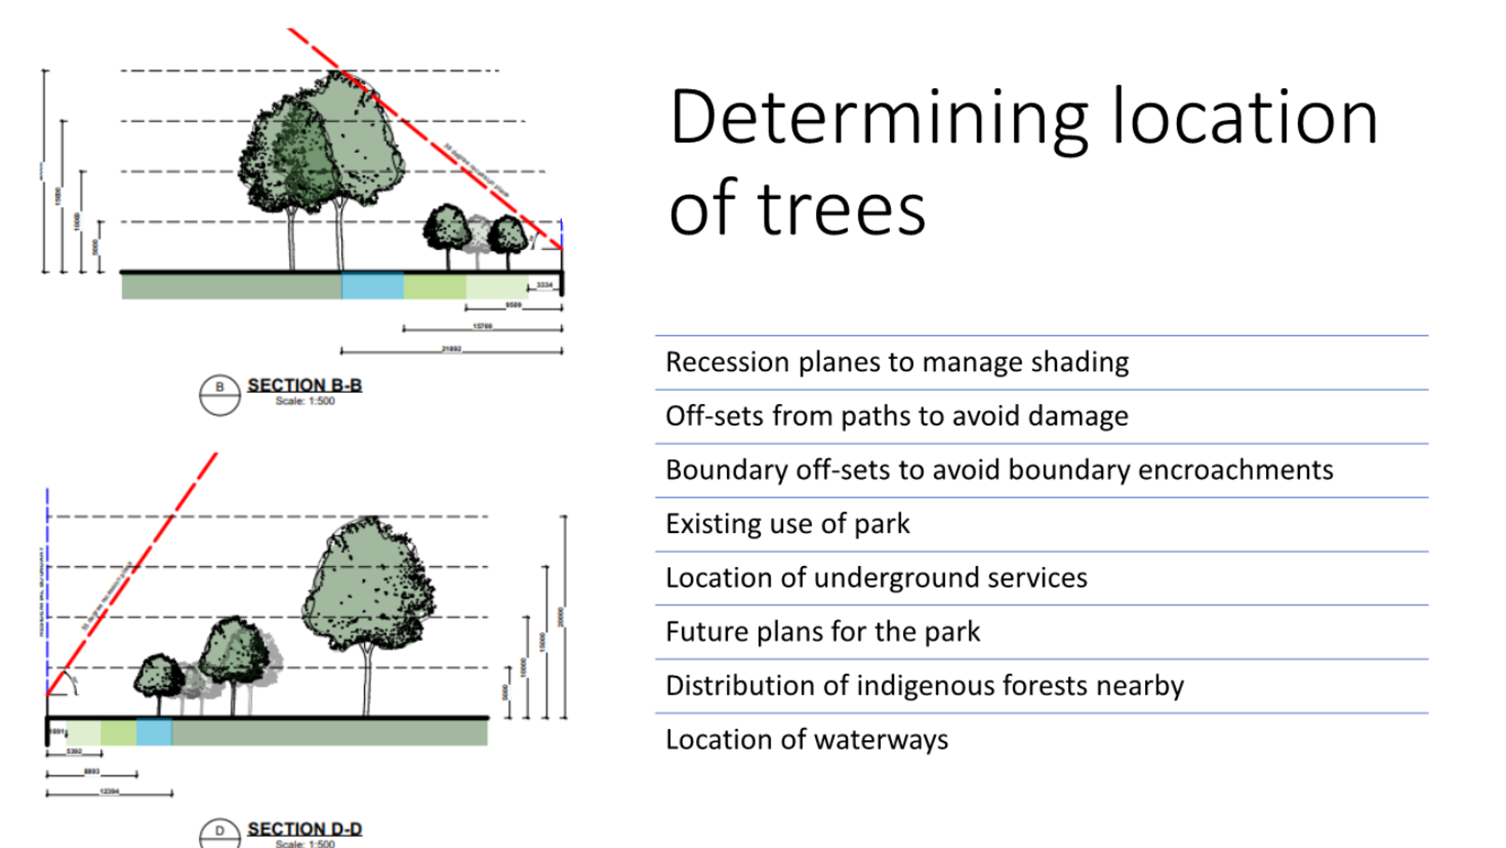 A diagram of trees and a diagram of a tree

Description automatically generated